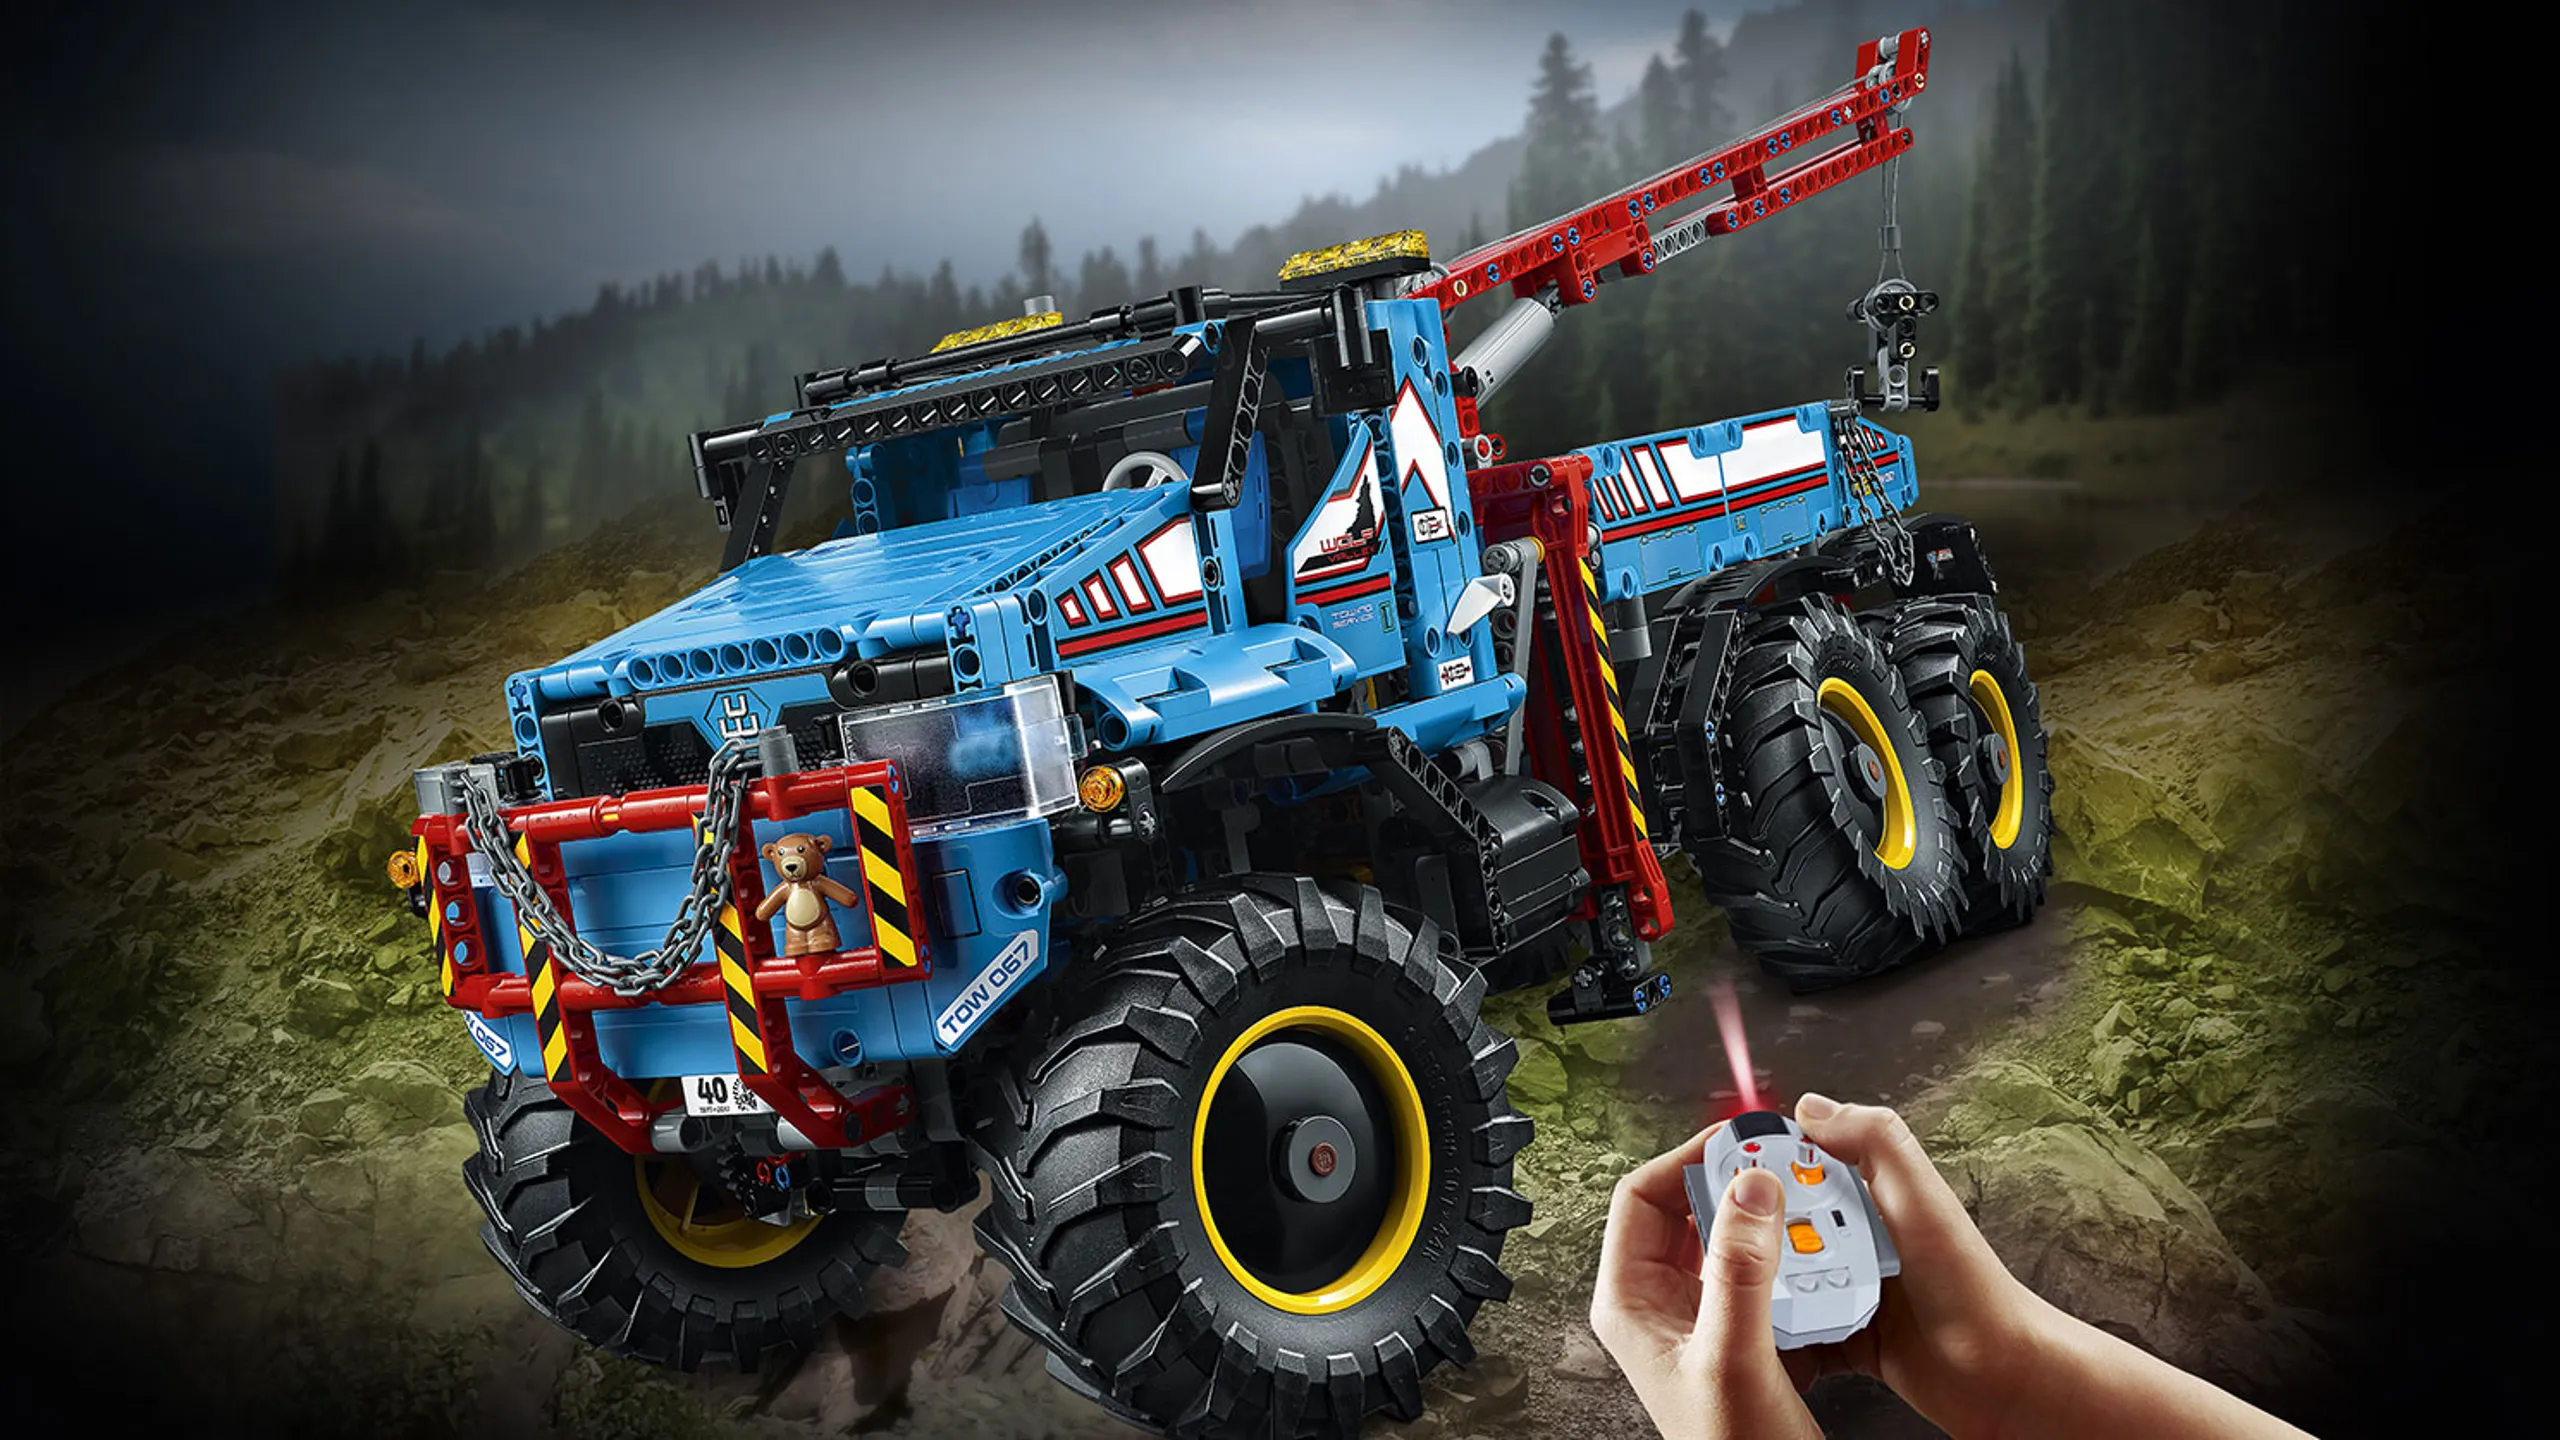 LEGO Technic - 42070 6x6 All Terrain Tow Truck - This truck has huge chunky tires, heavy-duty bull bar with chain and hook, movable lights and a detailed driver's cab with opening doors and you can activate the power functions remote control.